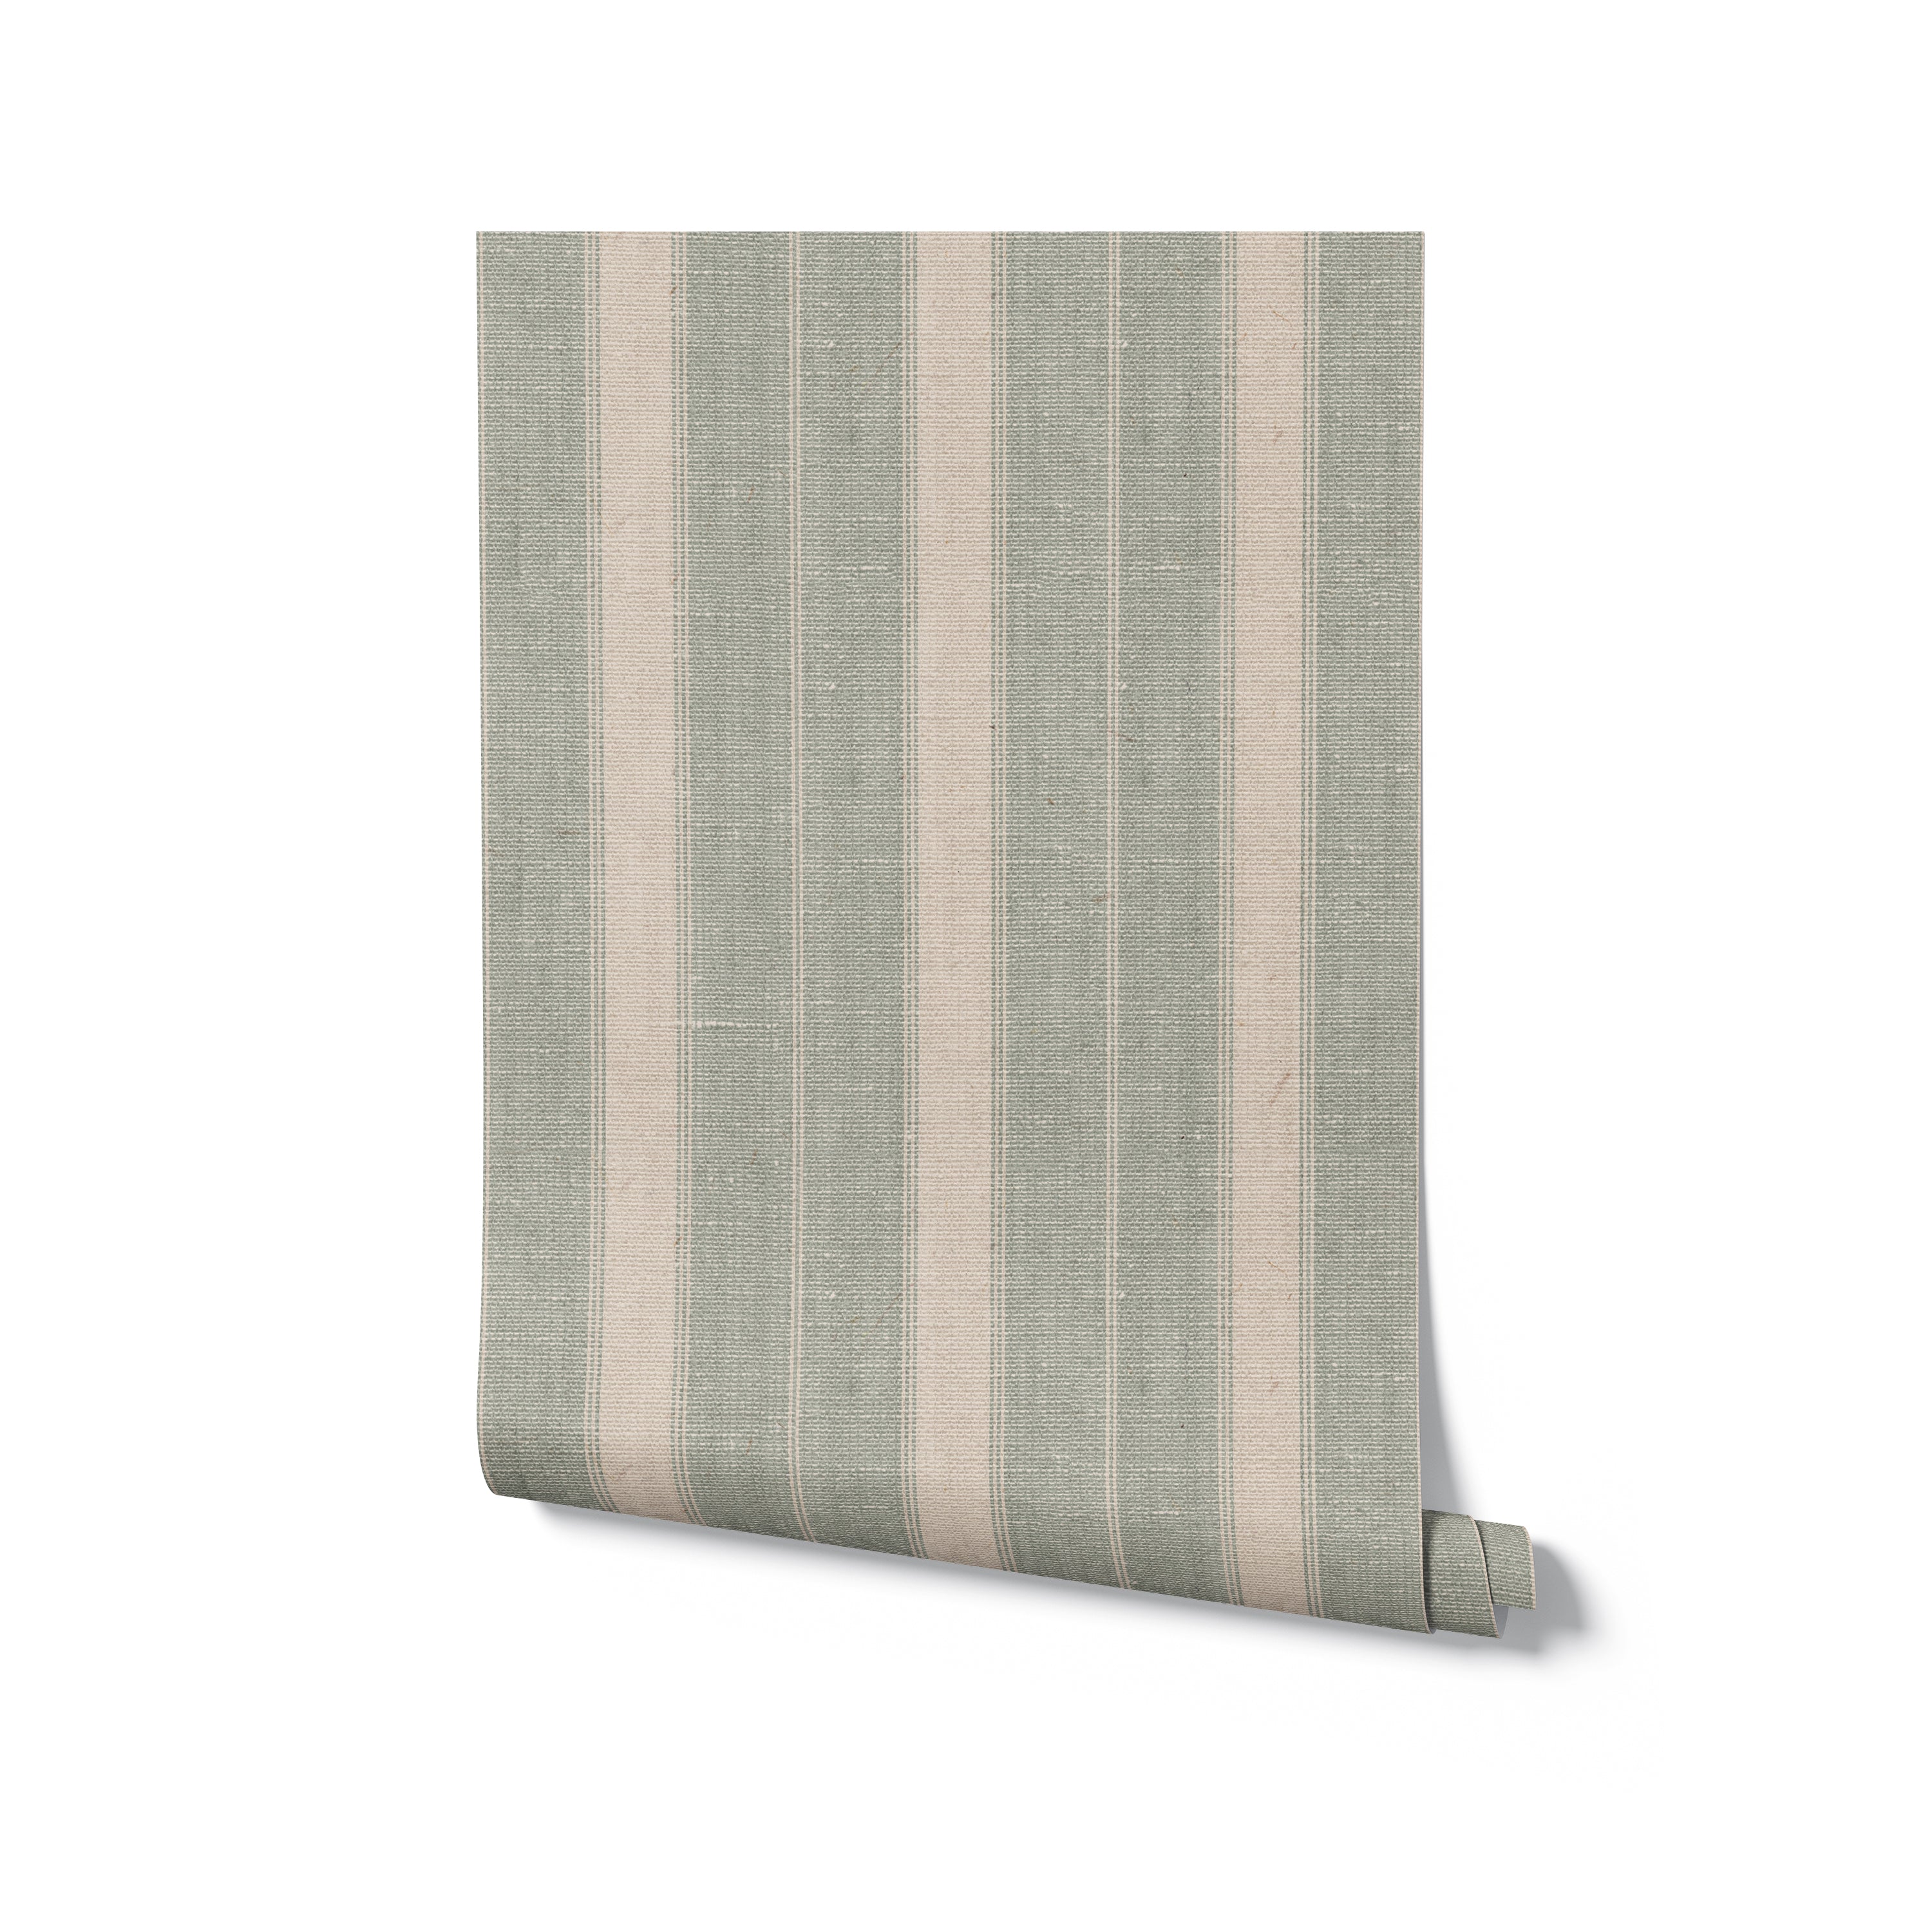 A roll of 'Burlap Striped Wallpaper' shown in a slight curl, emphasizing the simple elegance of the textile pattern in a classic stripe design, ready to enhance a room with its warm tones